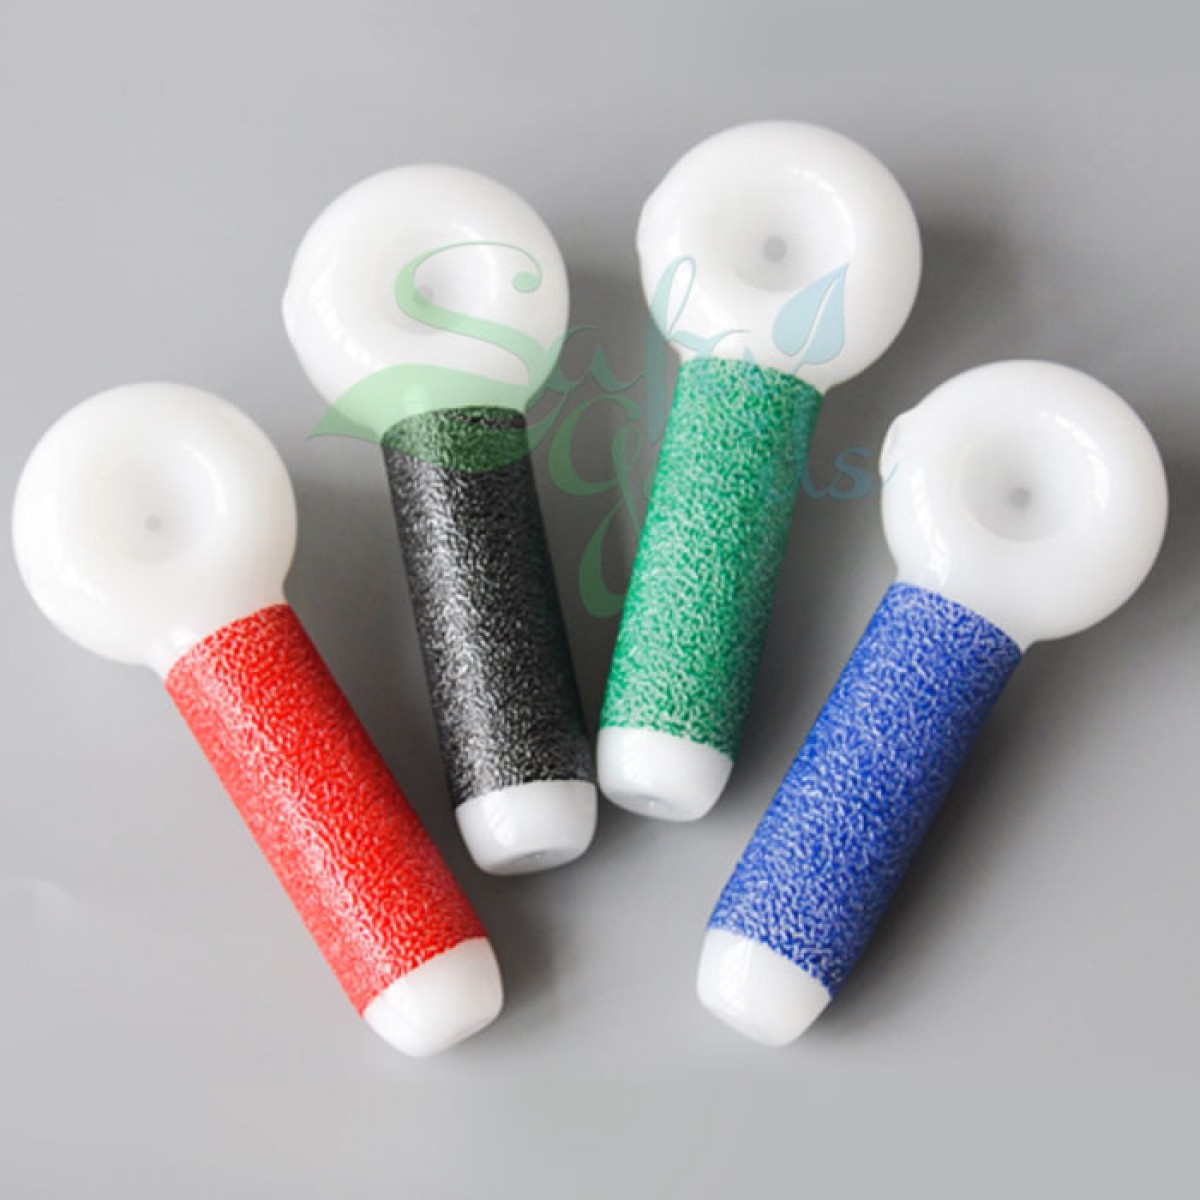 5 Inch Textured Glass Hand Pipes Bundle of 2